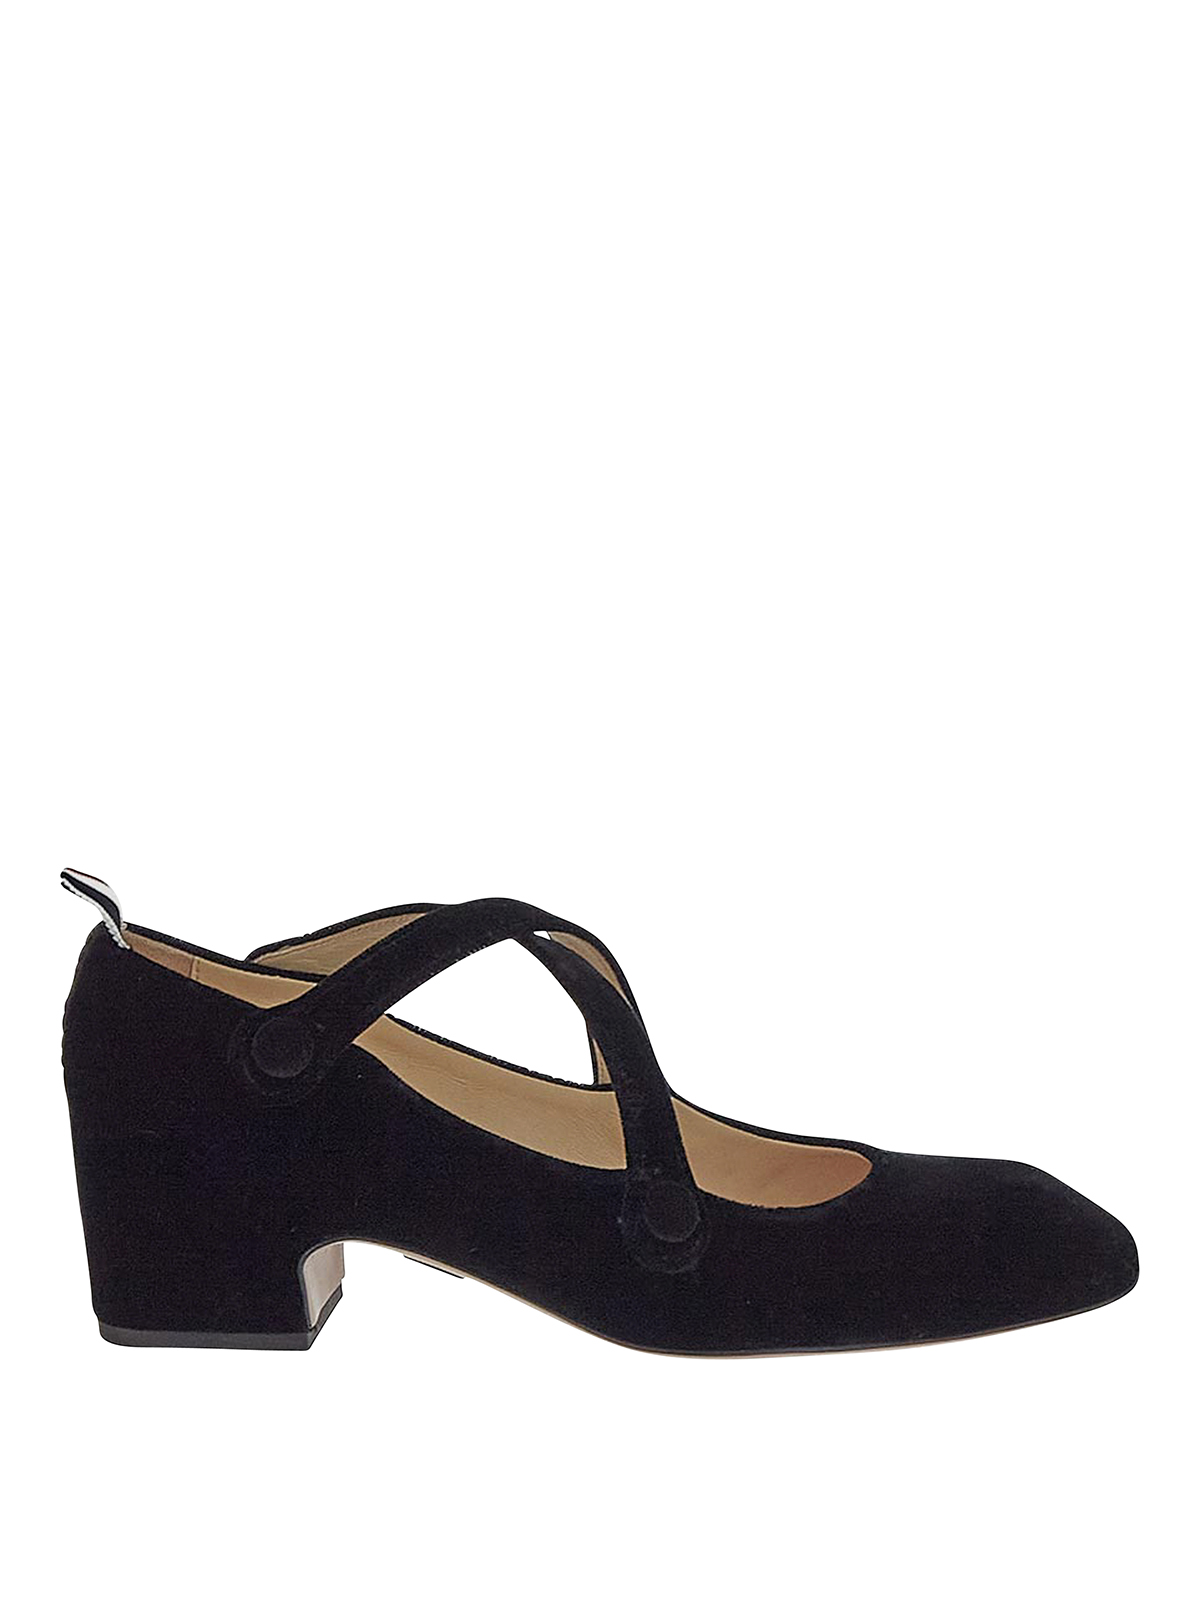 Thom Browne Criss Cross Straps Pumps In Negro